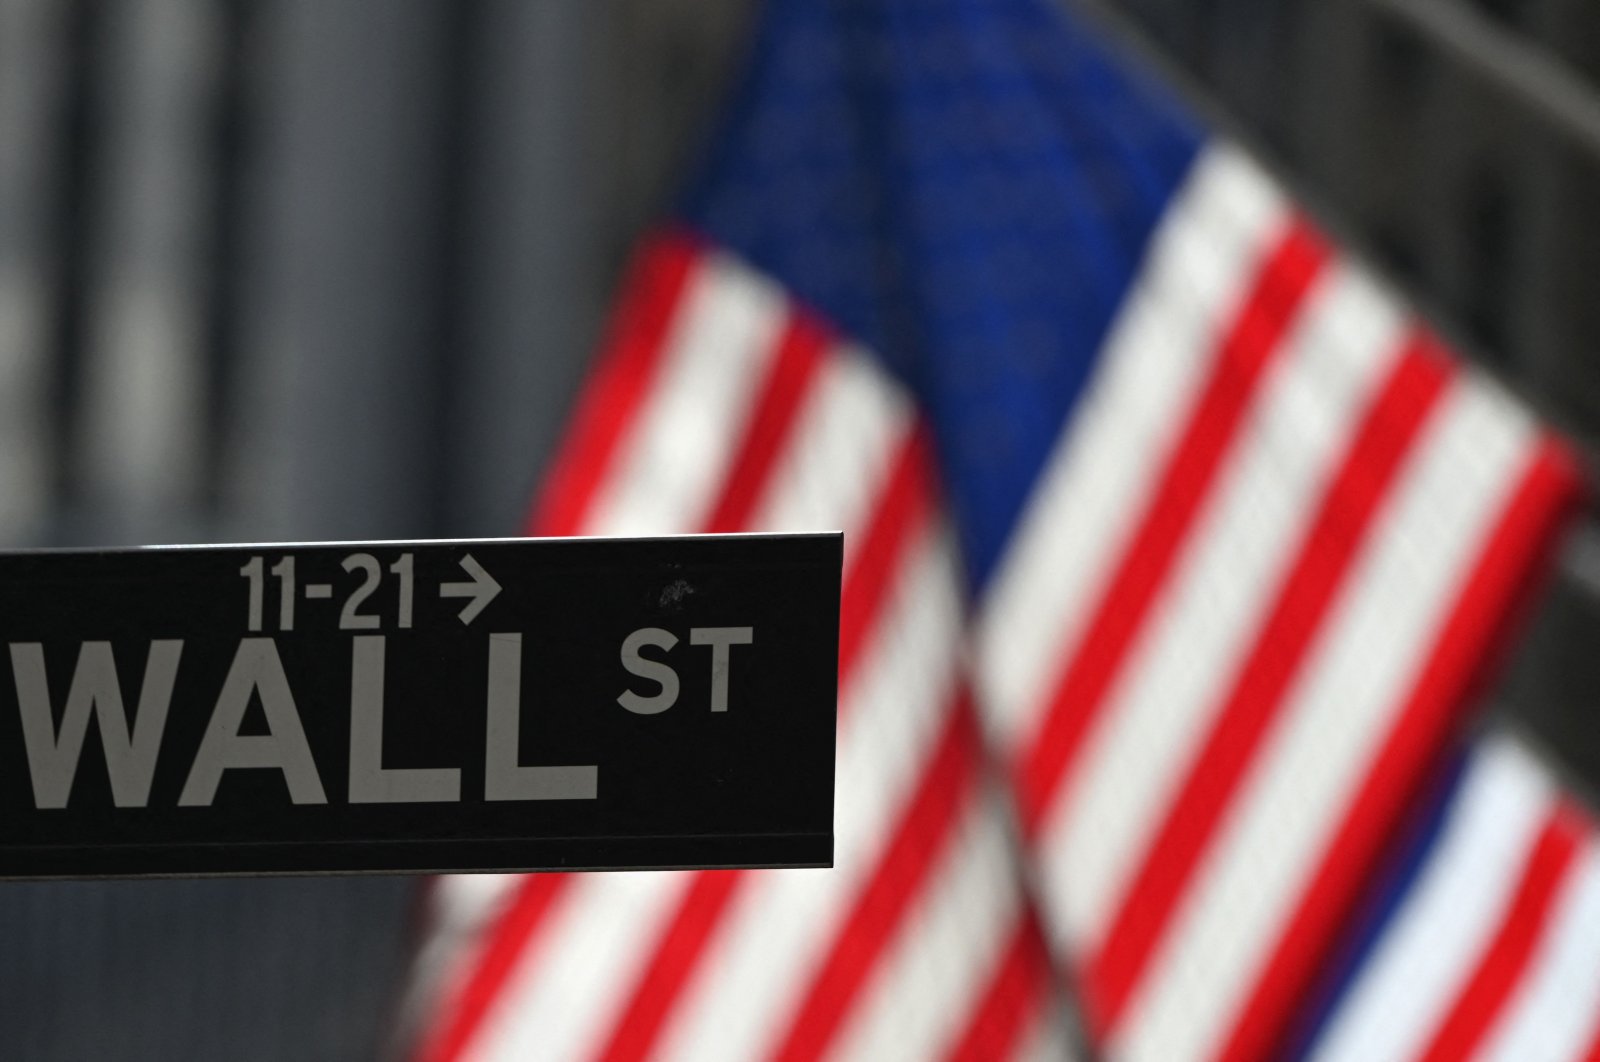 A Wall Street sign at the New York Stock Exchange (NYSE) is seen in New York City, New York, U.S., Feb. 17, 2021. (AFP Photo)